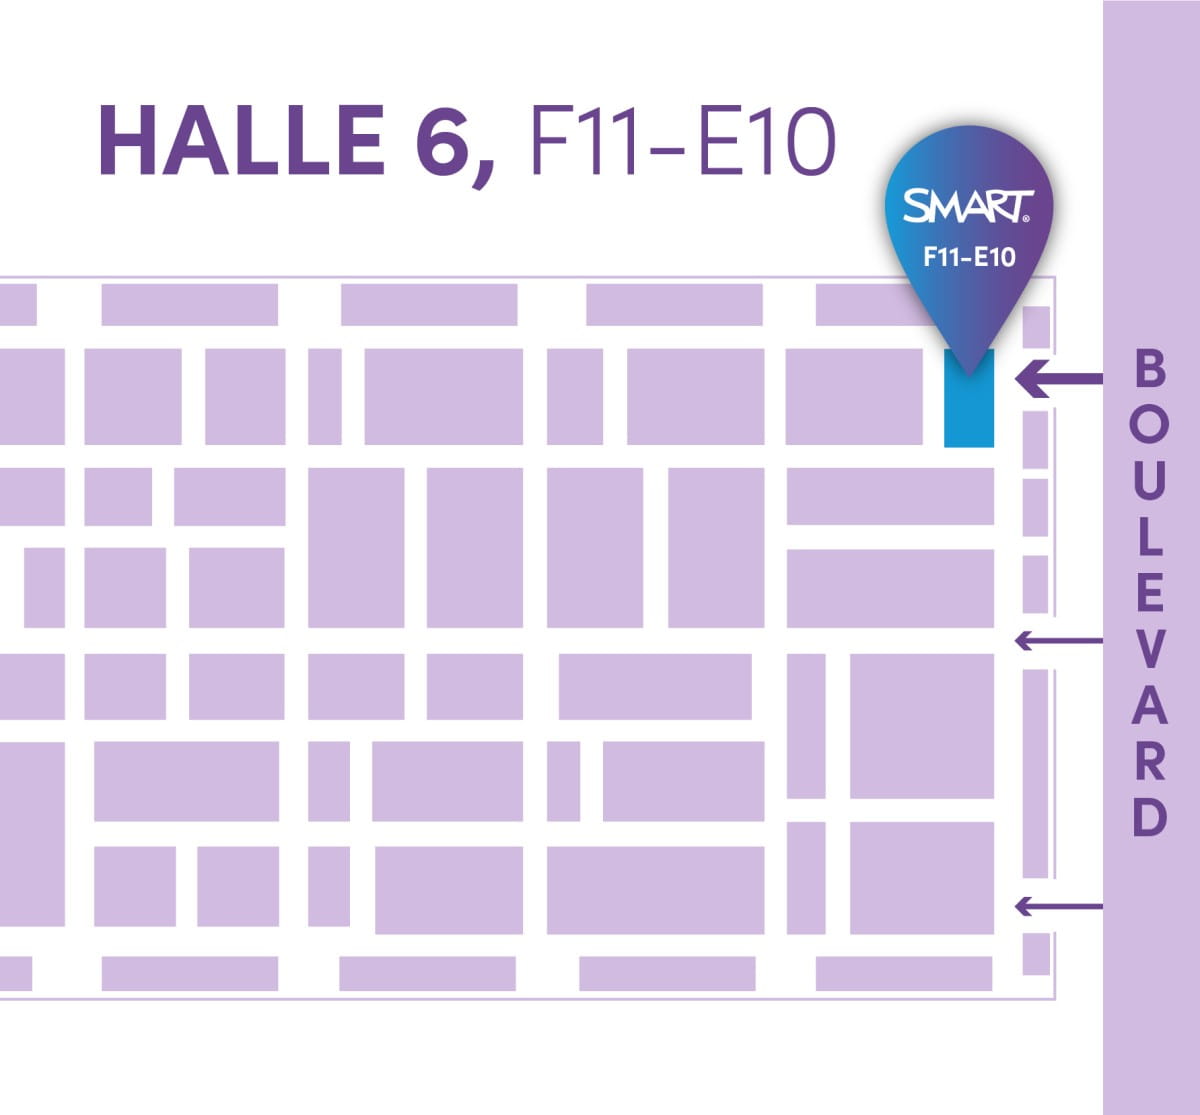 Floor plan for a trade show highlighting the SMART booth location in Hall 6, providing visitors with a map for navigation.